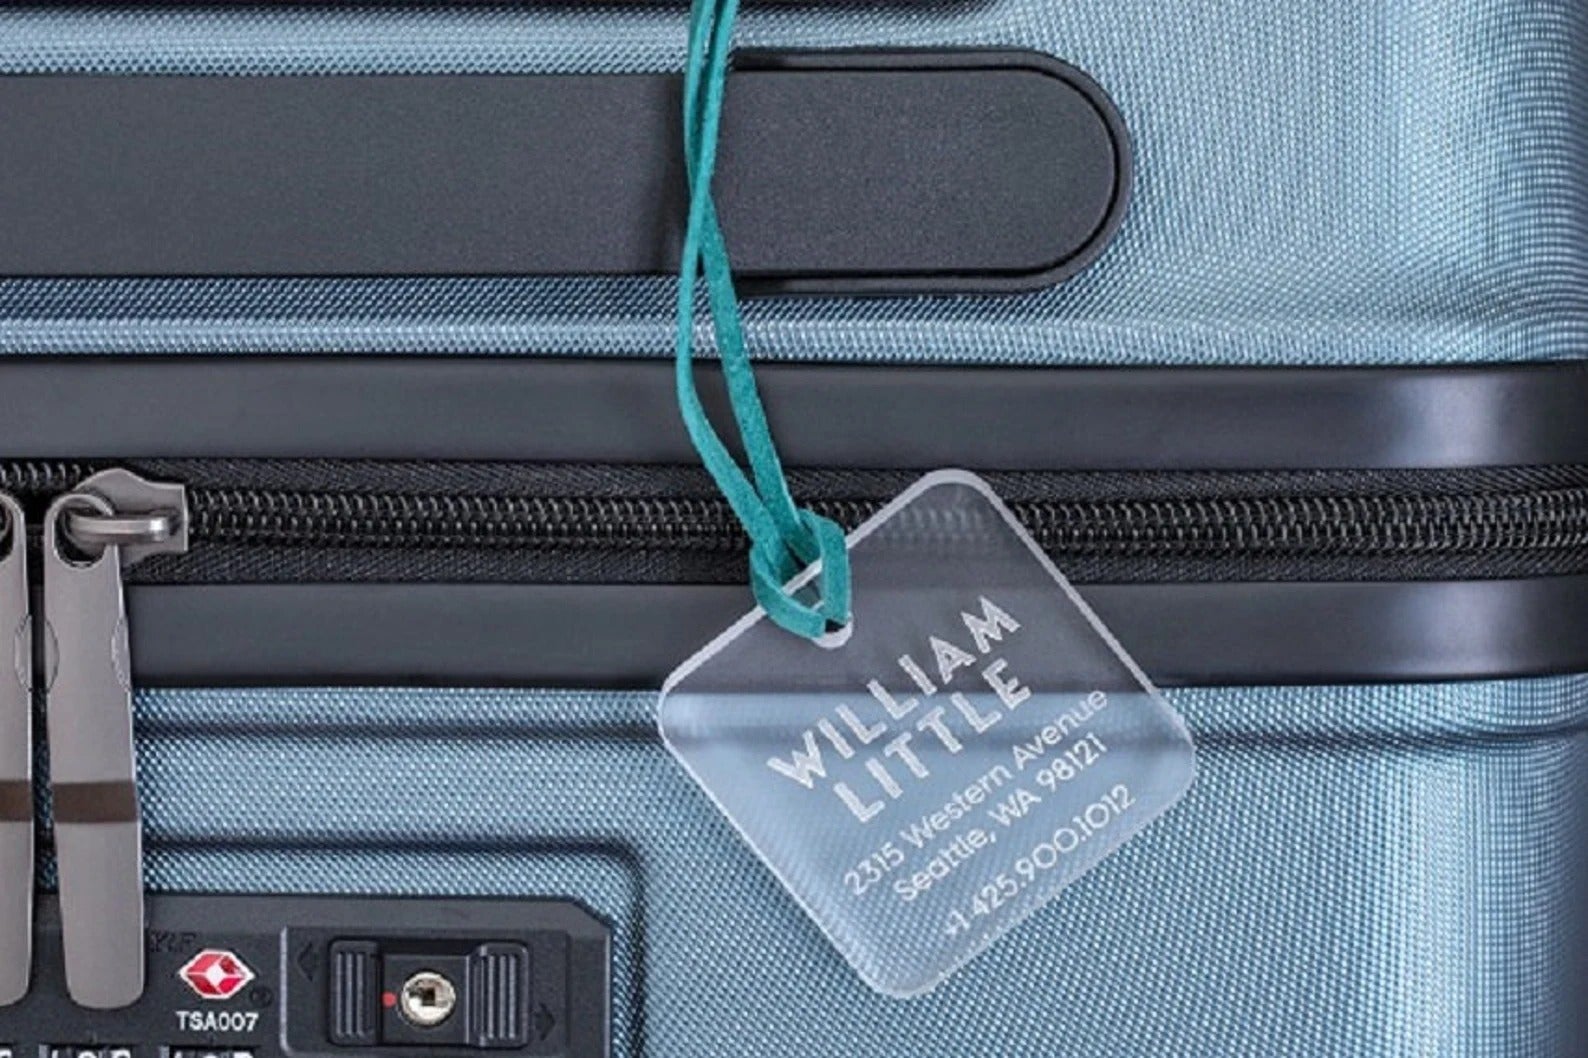 13 Best Luggage Tags to Make Spotting Your Suitcase Easier